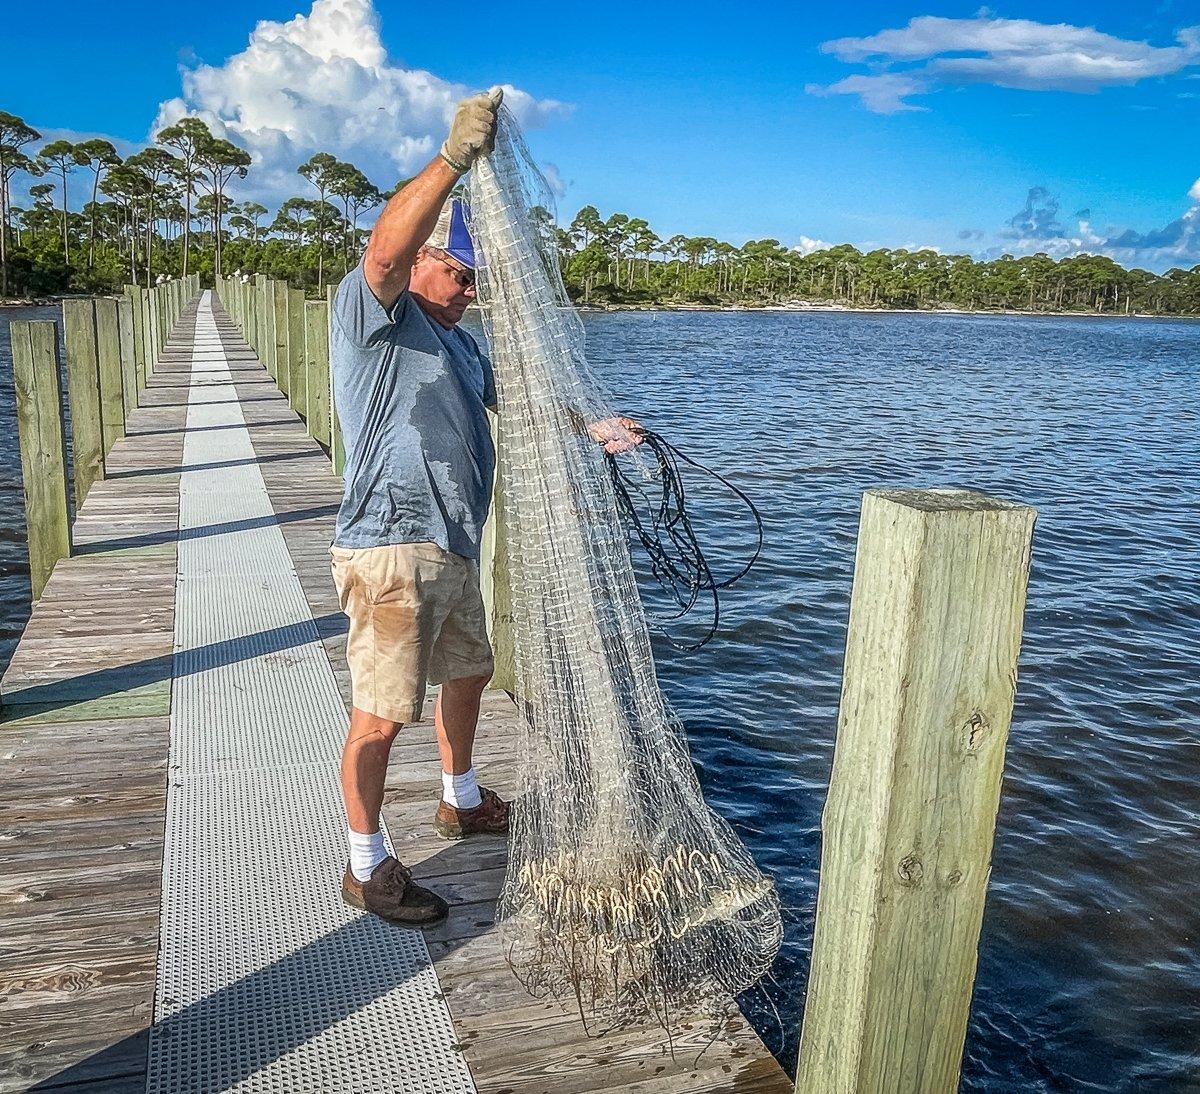 Apalachicola native Rusty Crum knows when and where to throw a net for fat fall mullet.